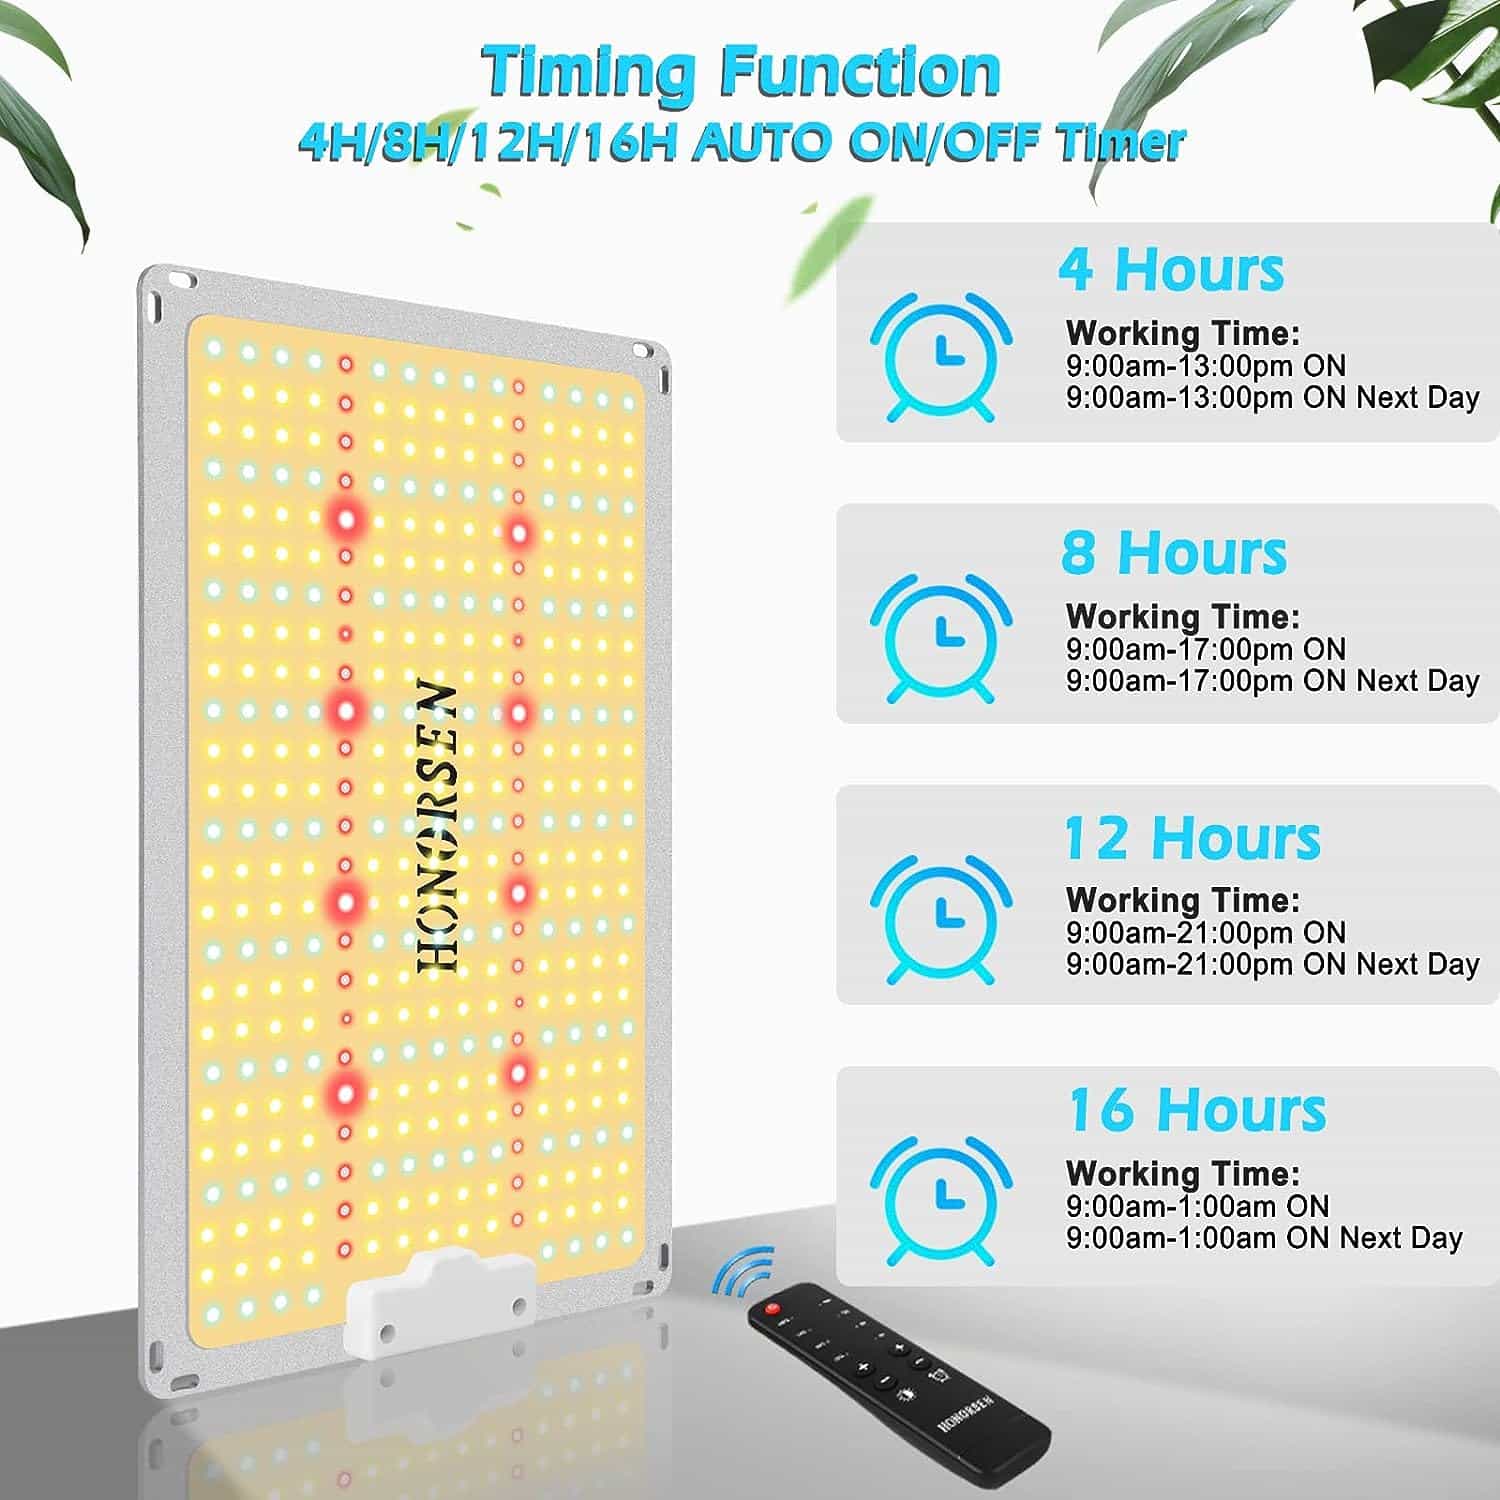 HONORSEN 1000W LED Grow Light Full Spectrum 3x3ft Coverage Remote Control Dimmable Grow Lamps with Timer Plant Light for Hydroponic Indoor Plants Veg and Flower (368Pcs LEDs)